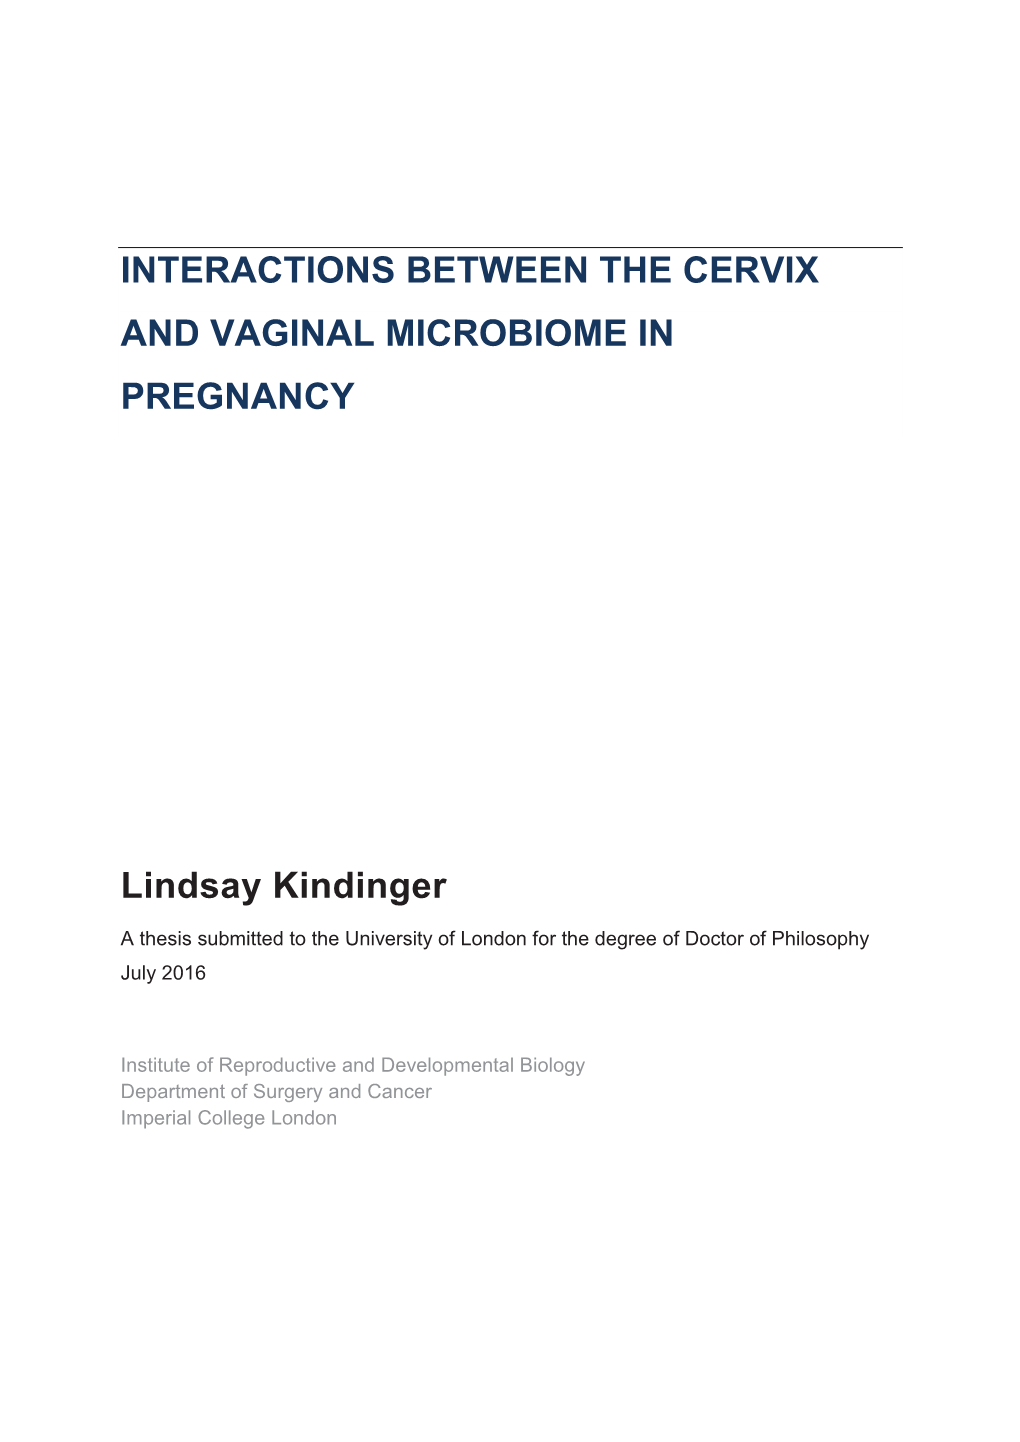 Interactions Between the Cervix and Vaginal Microbiome in Pregnancy